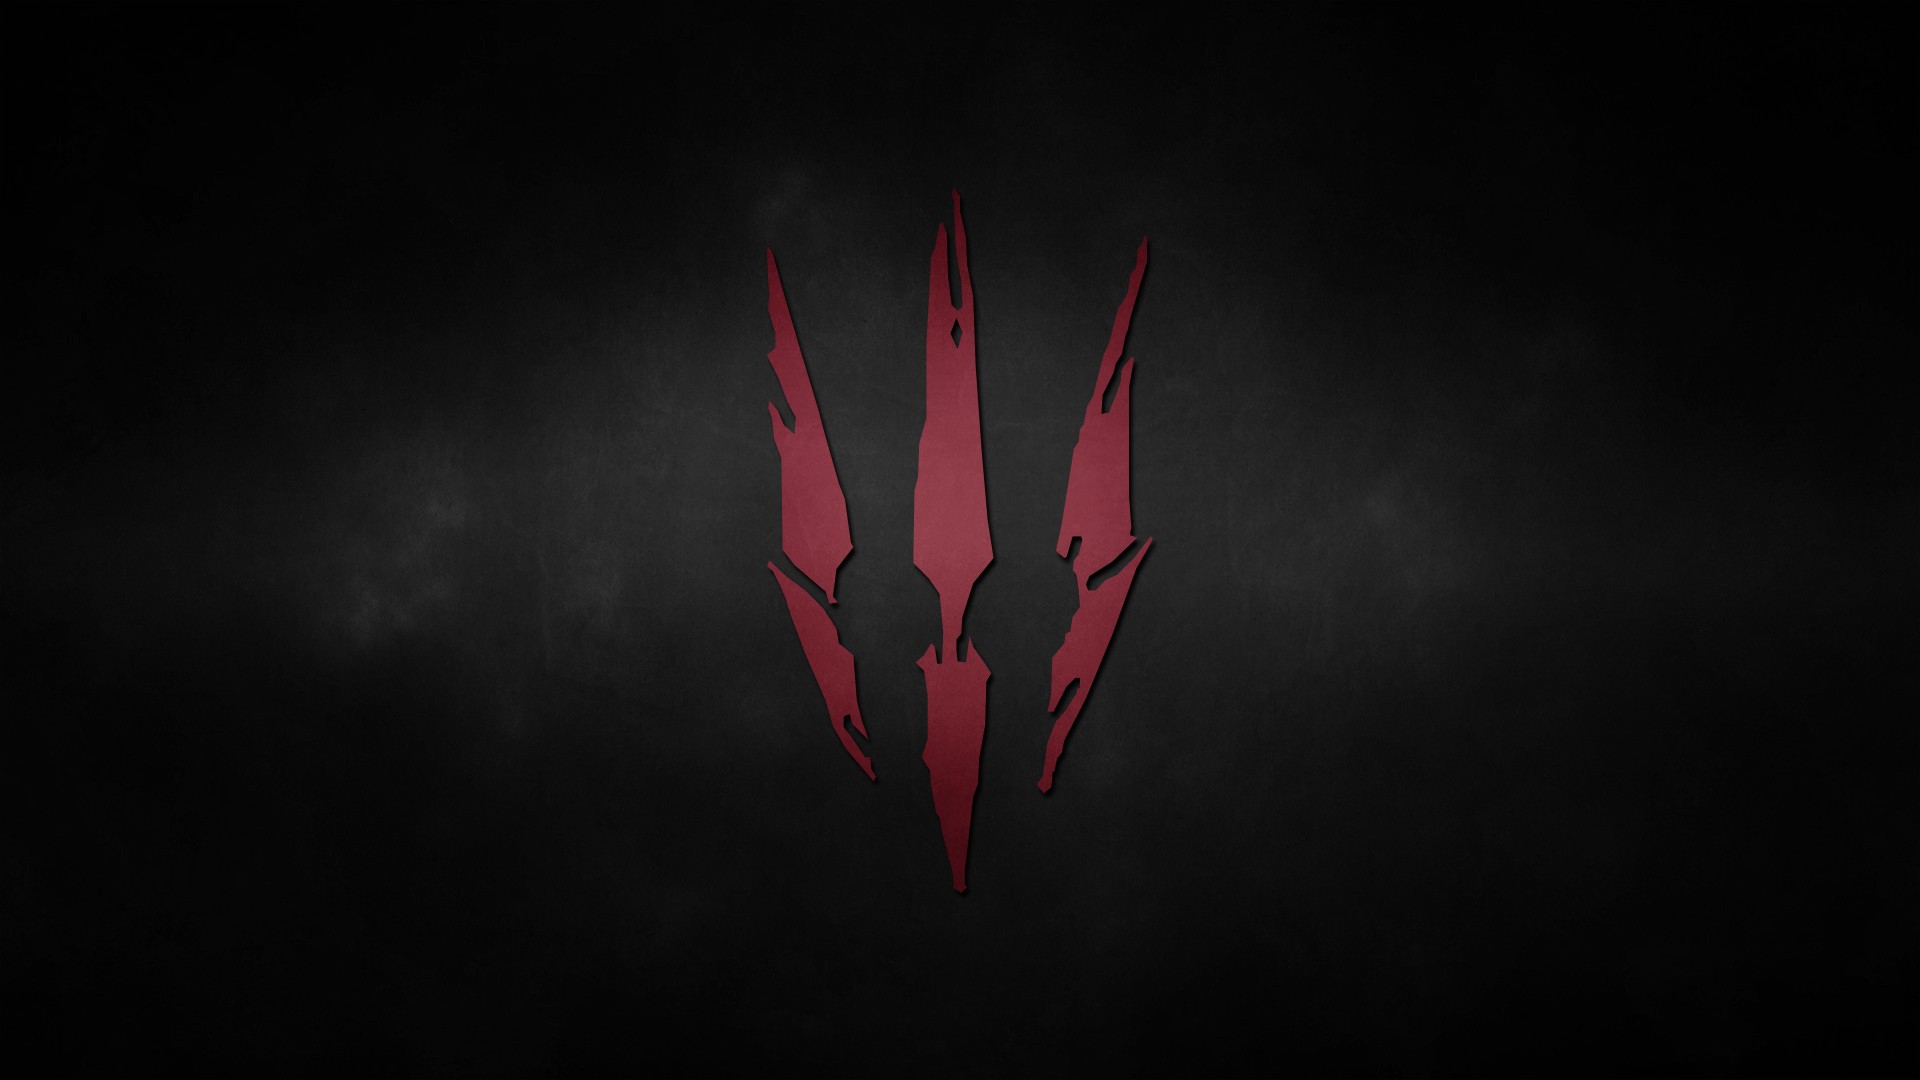 General 1920x1080 The Witcher The Witcher 3: Wild Hunt video games artwork minimalism video game art simple background black background PC gaming